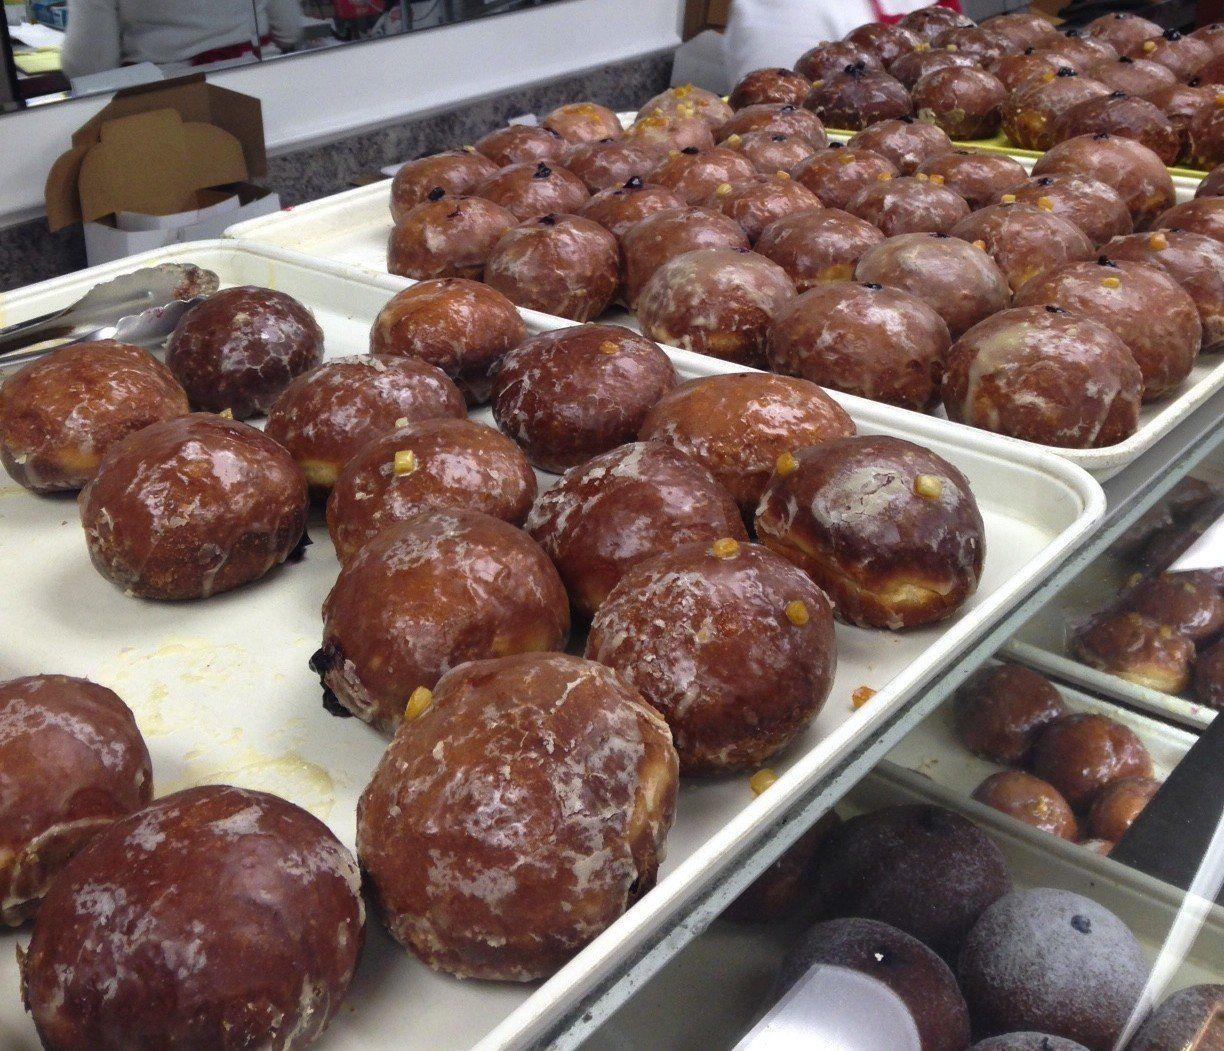 Paczki day specials from 37 Chicago restaurants and bakeries